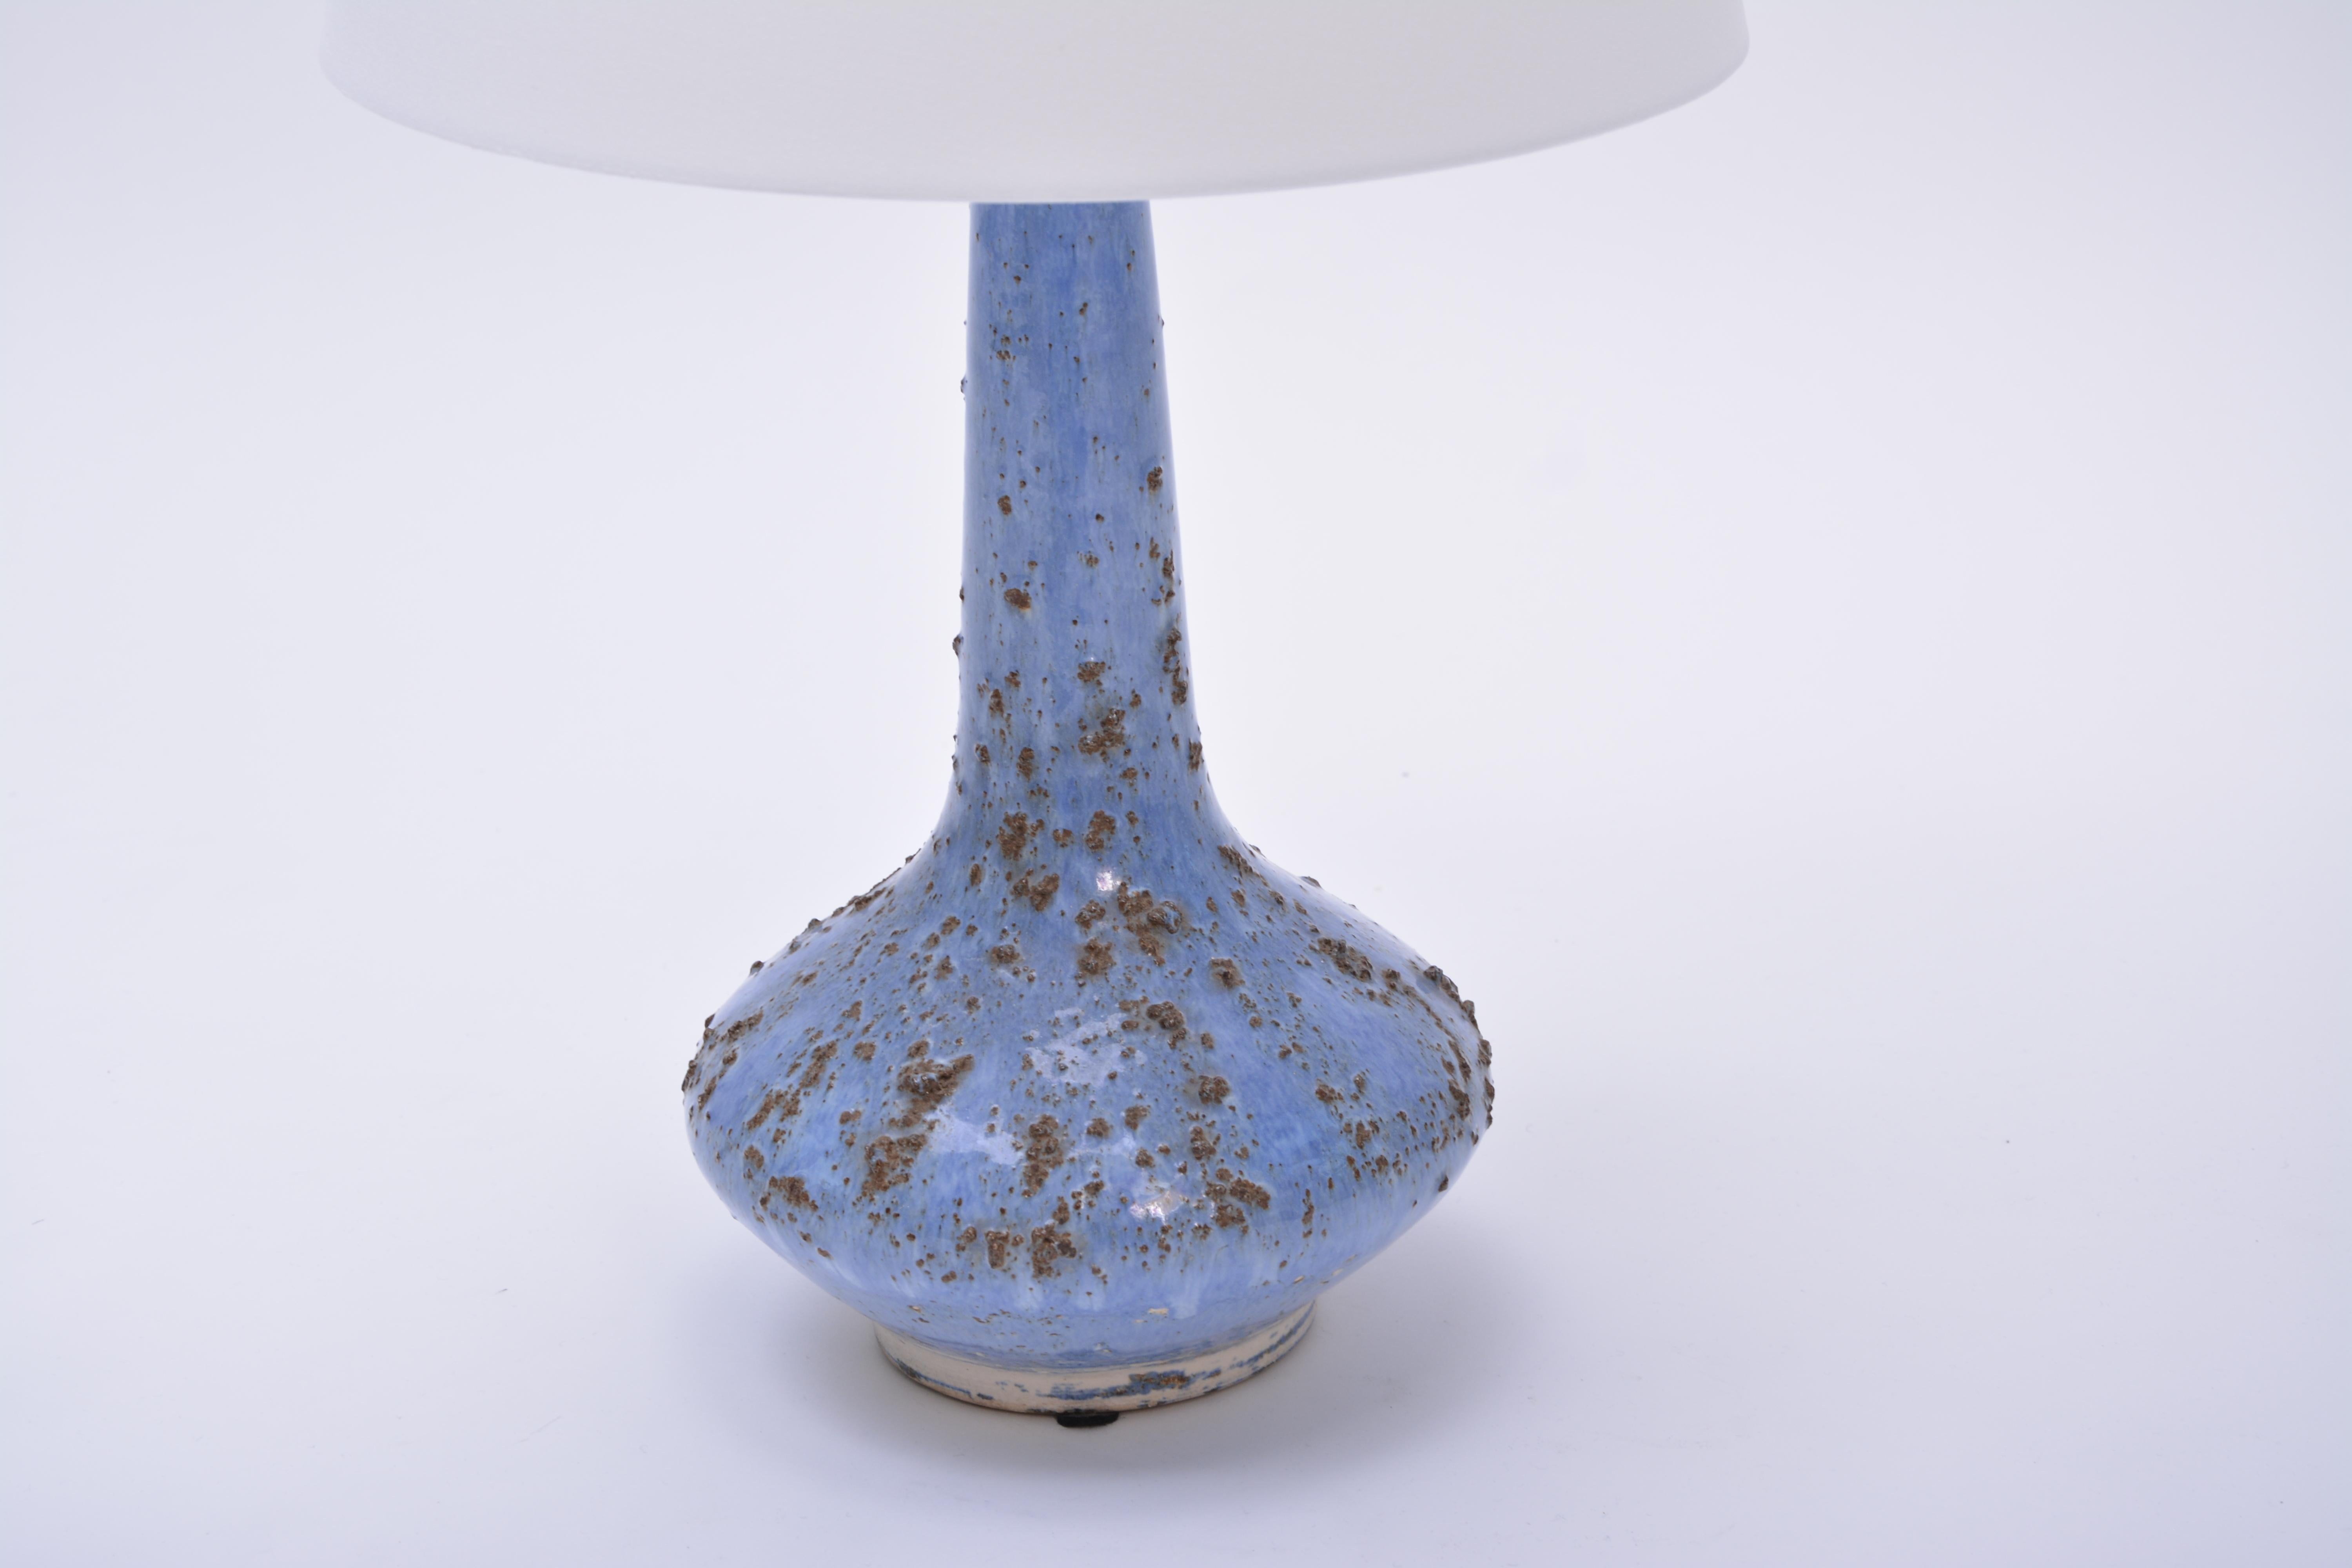 This table lamp was produced by Danish company Soholm Stentoj in the 1960s. The lamps base is made of stoneware and features a glazing in light blue. The lamp has been rewired and has a new shade.